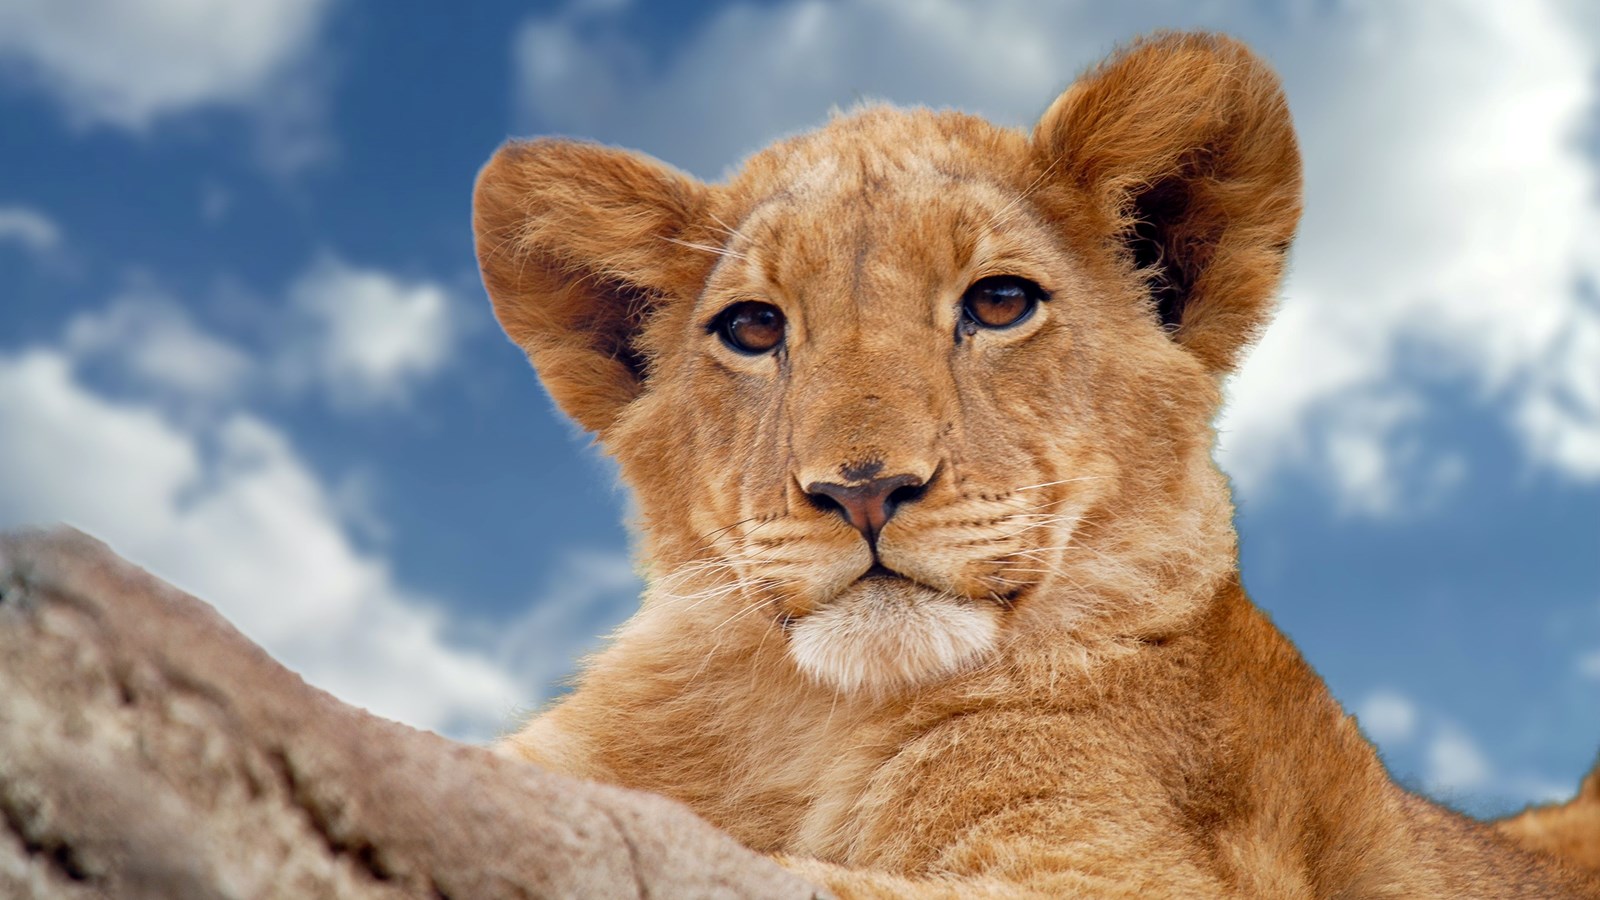 lion cub laying down and looking at the camera